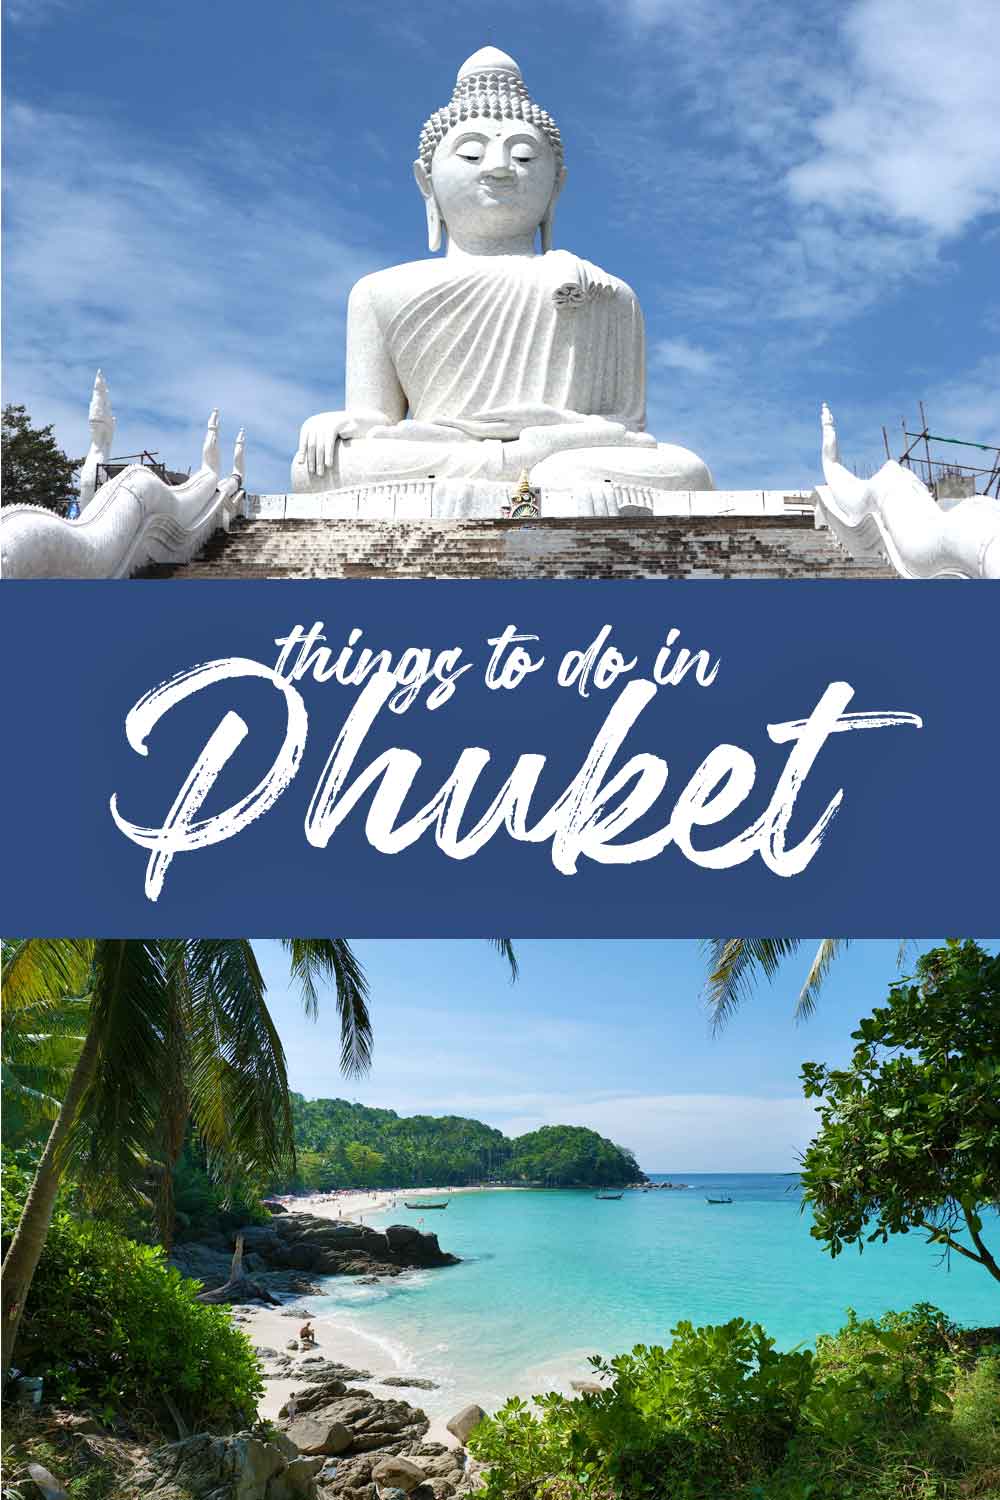 Things to do in Phuket, Thailand